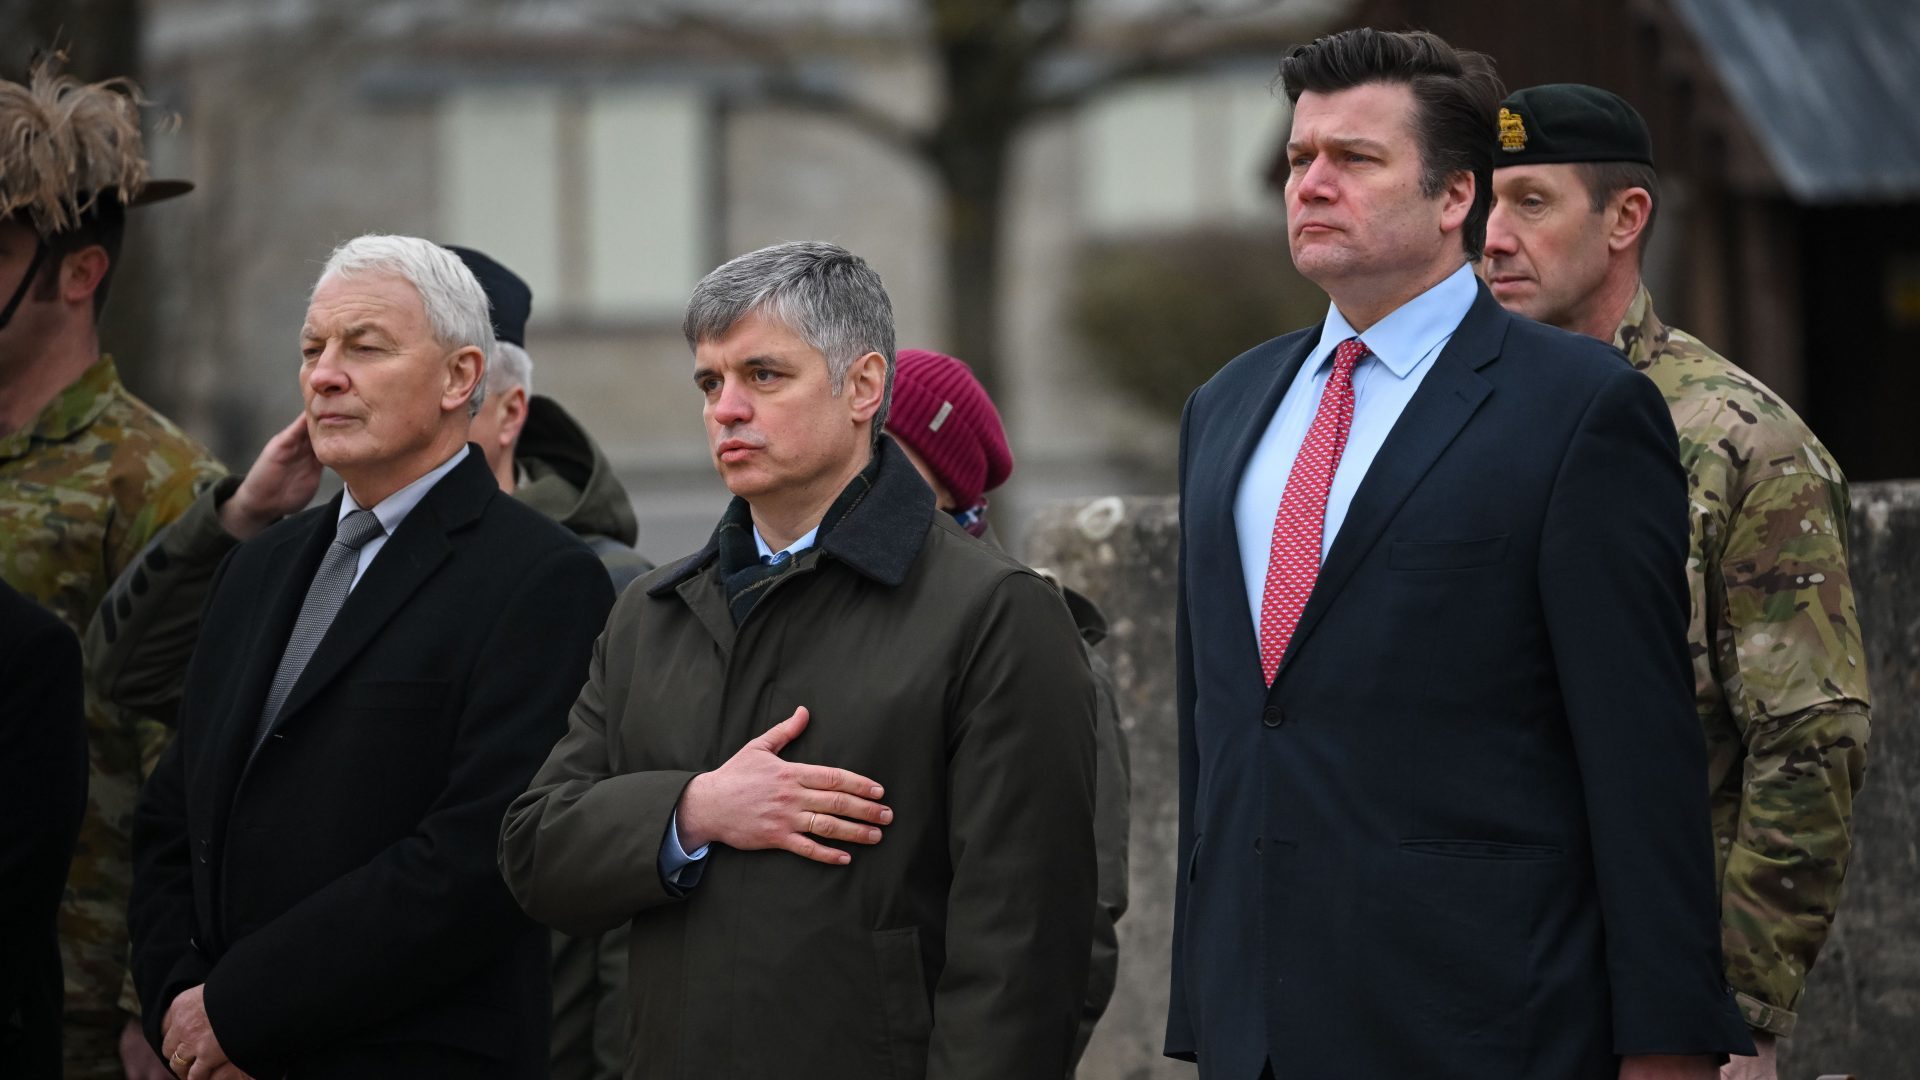 Ukrainian Ambassador to the UK, Vadym Prystaiko and Minister for the Armed Forces James Heappey during the Ukrainian National Anthem during a service in February near Salisbury ahead of the anniversary of the Russia invasion. Photo: Finnbarr Webster/Getty Images